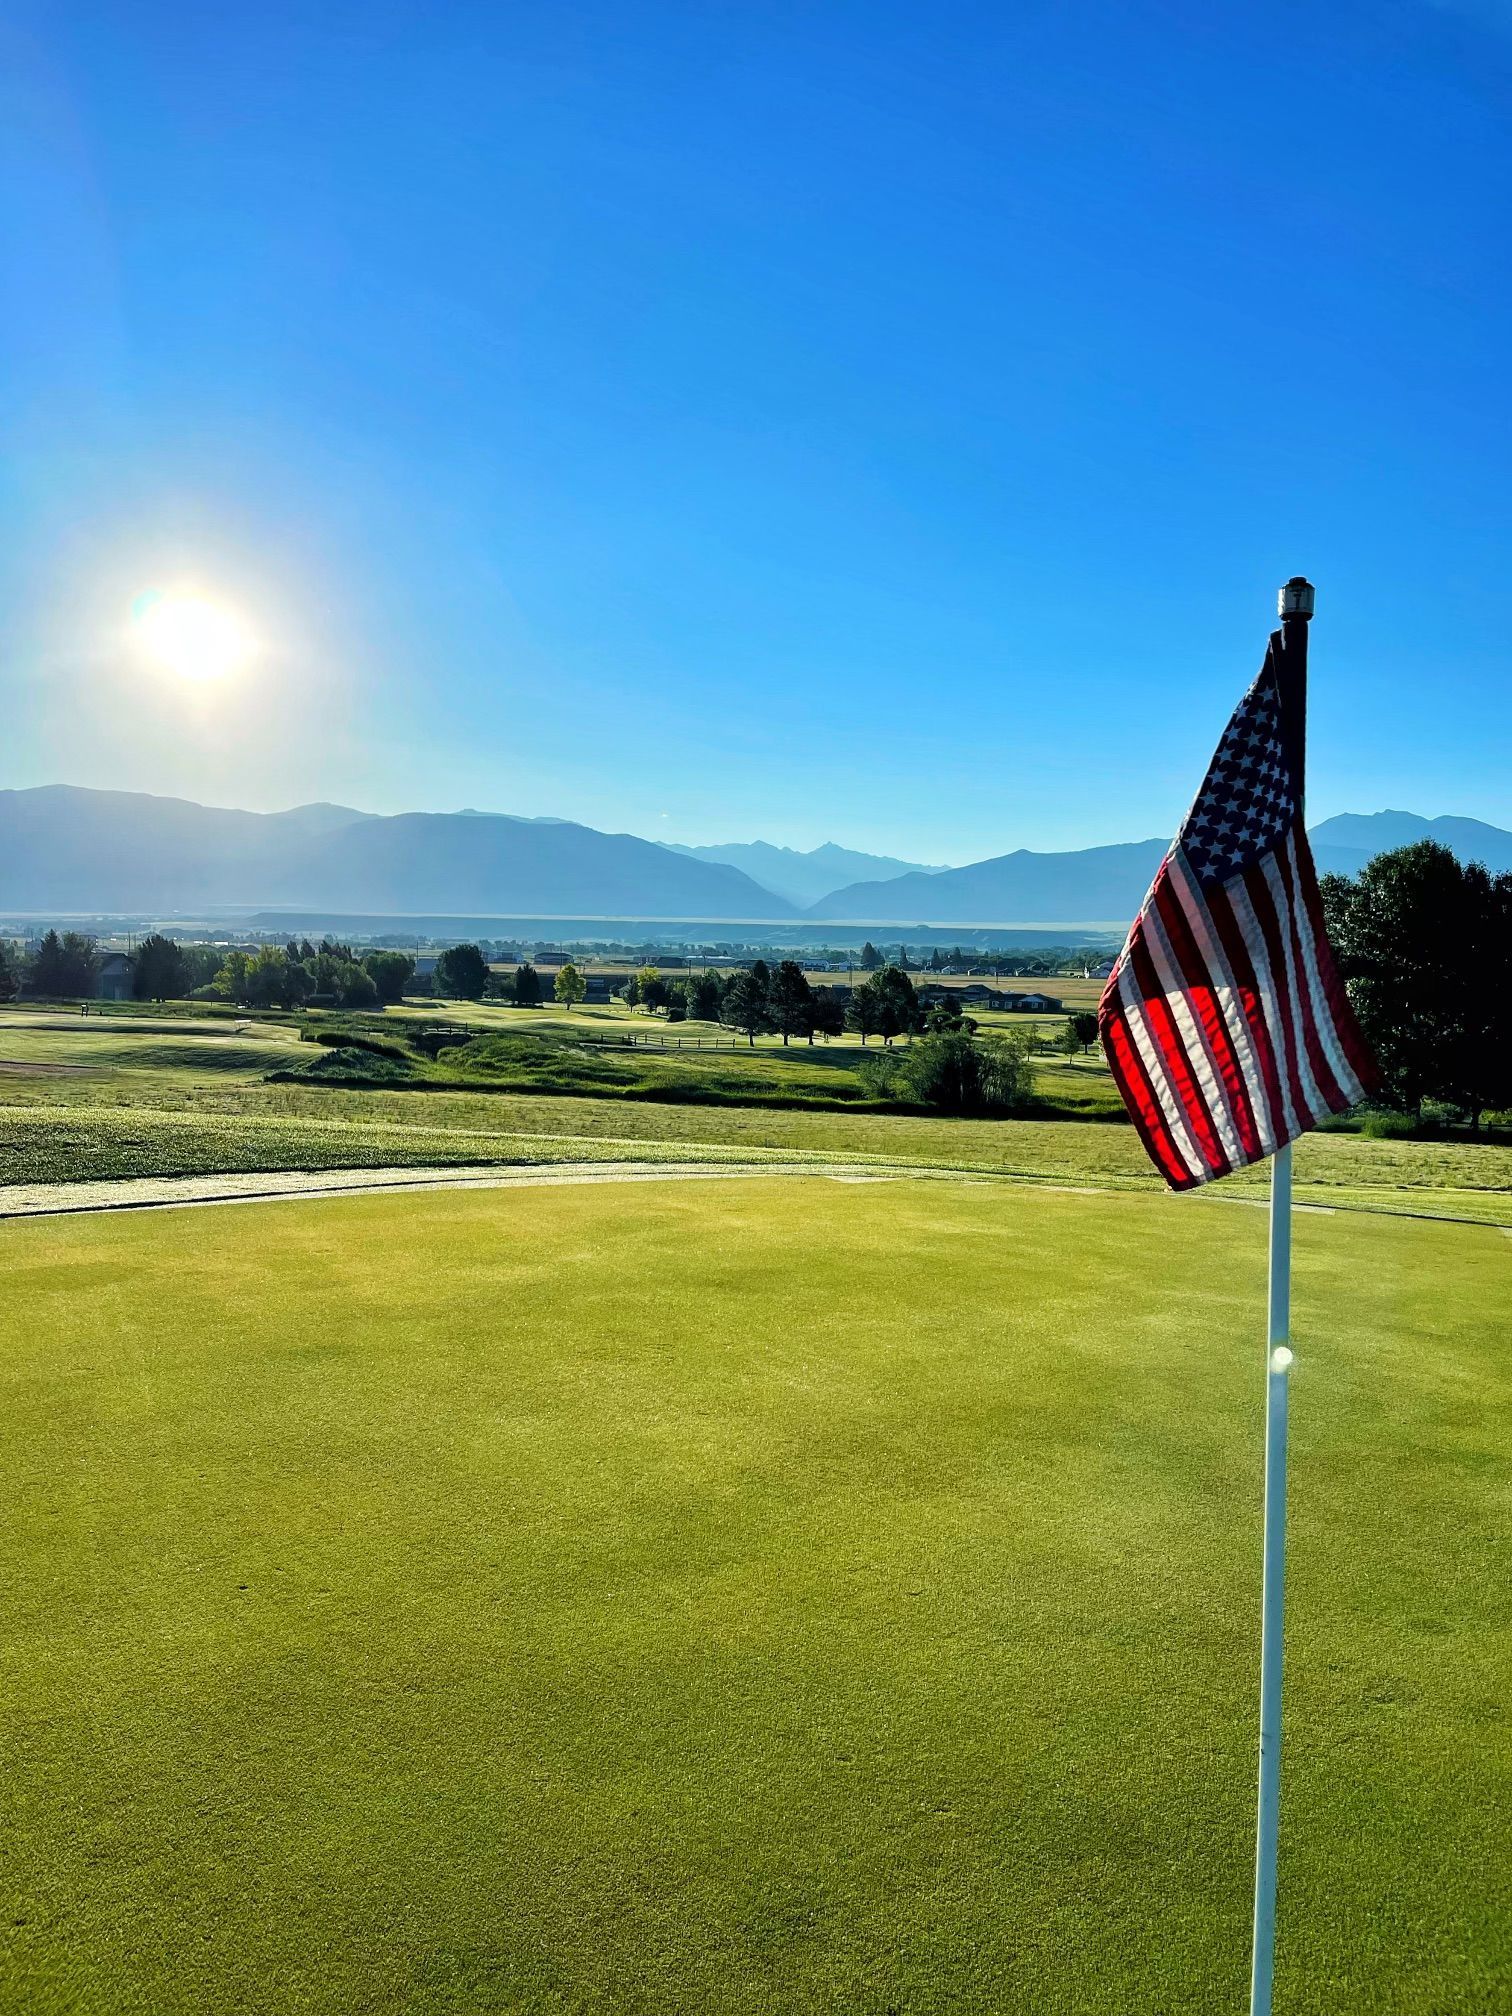 An american flag is flying on a golf course with mountains in the background.